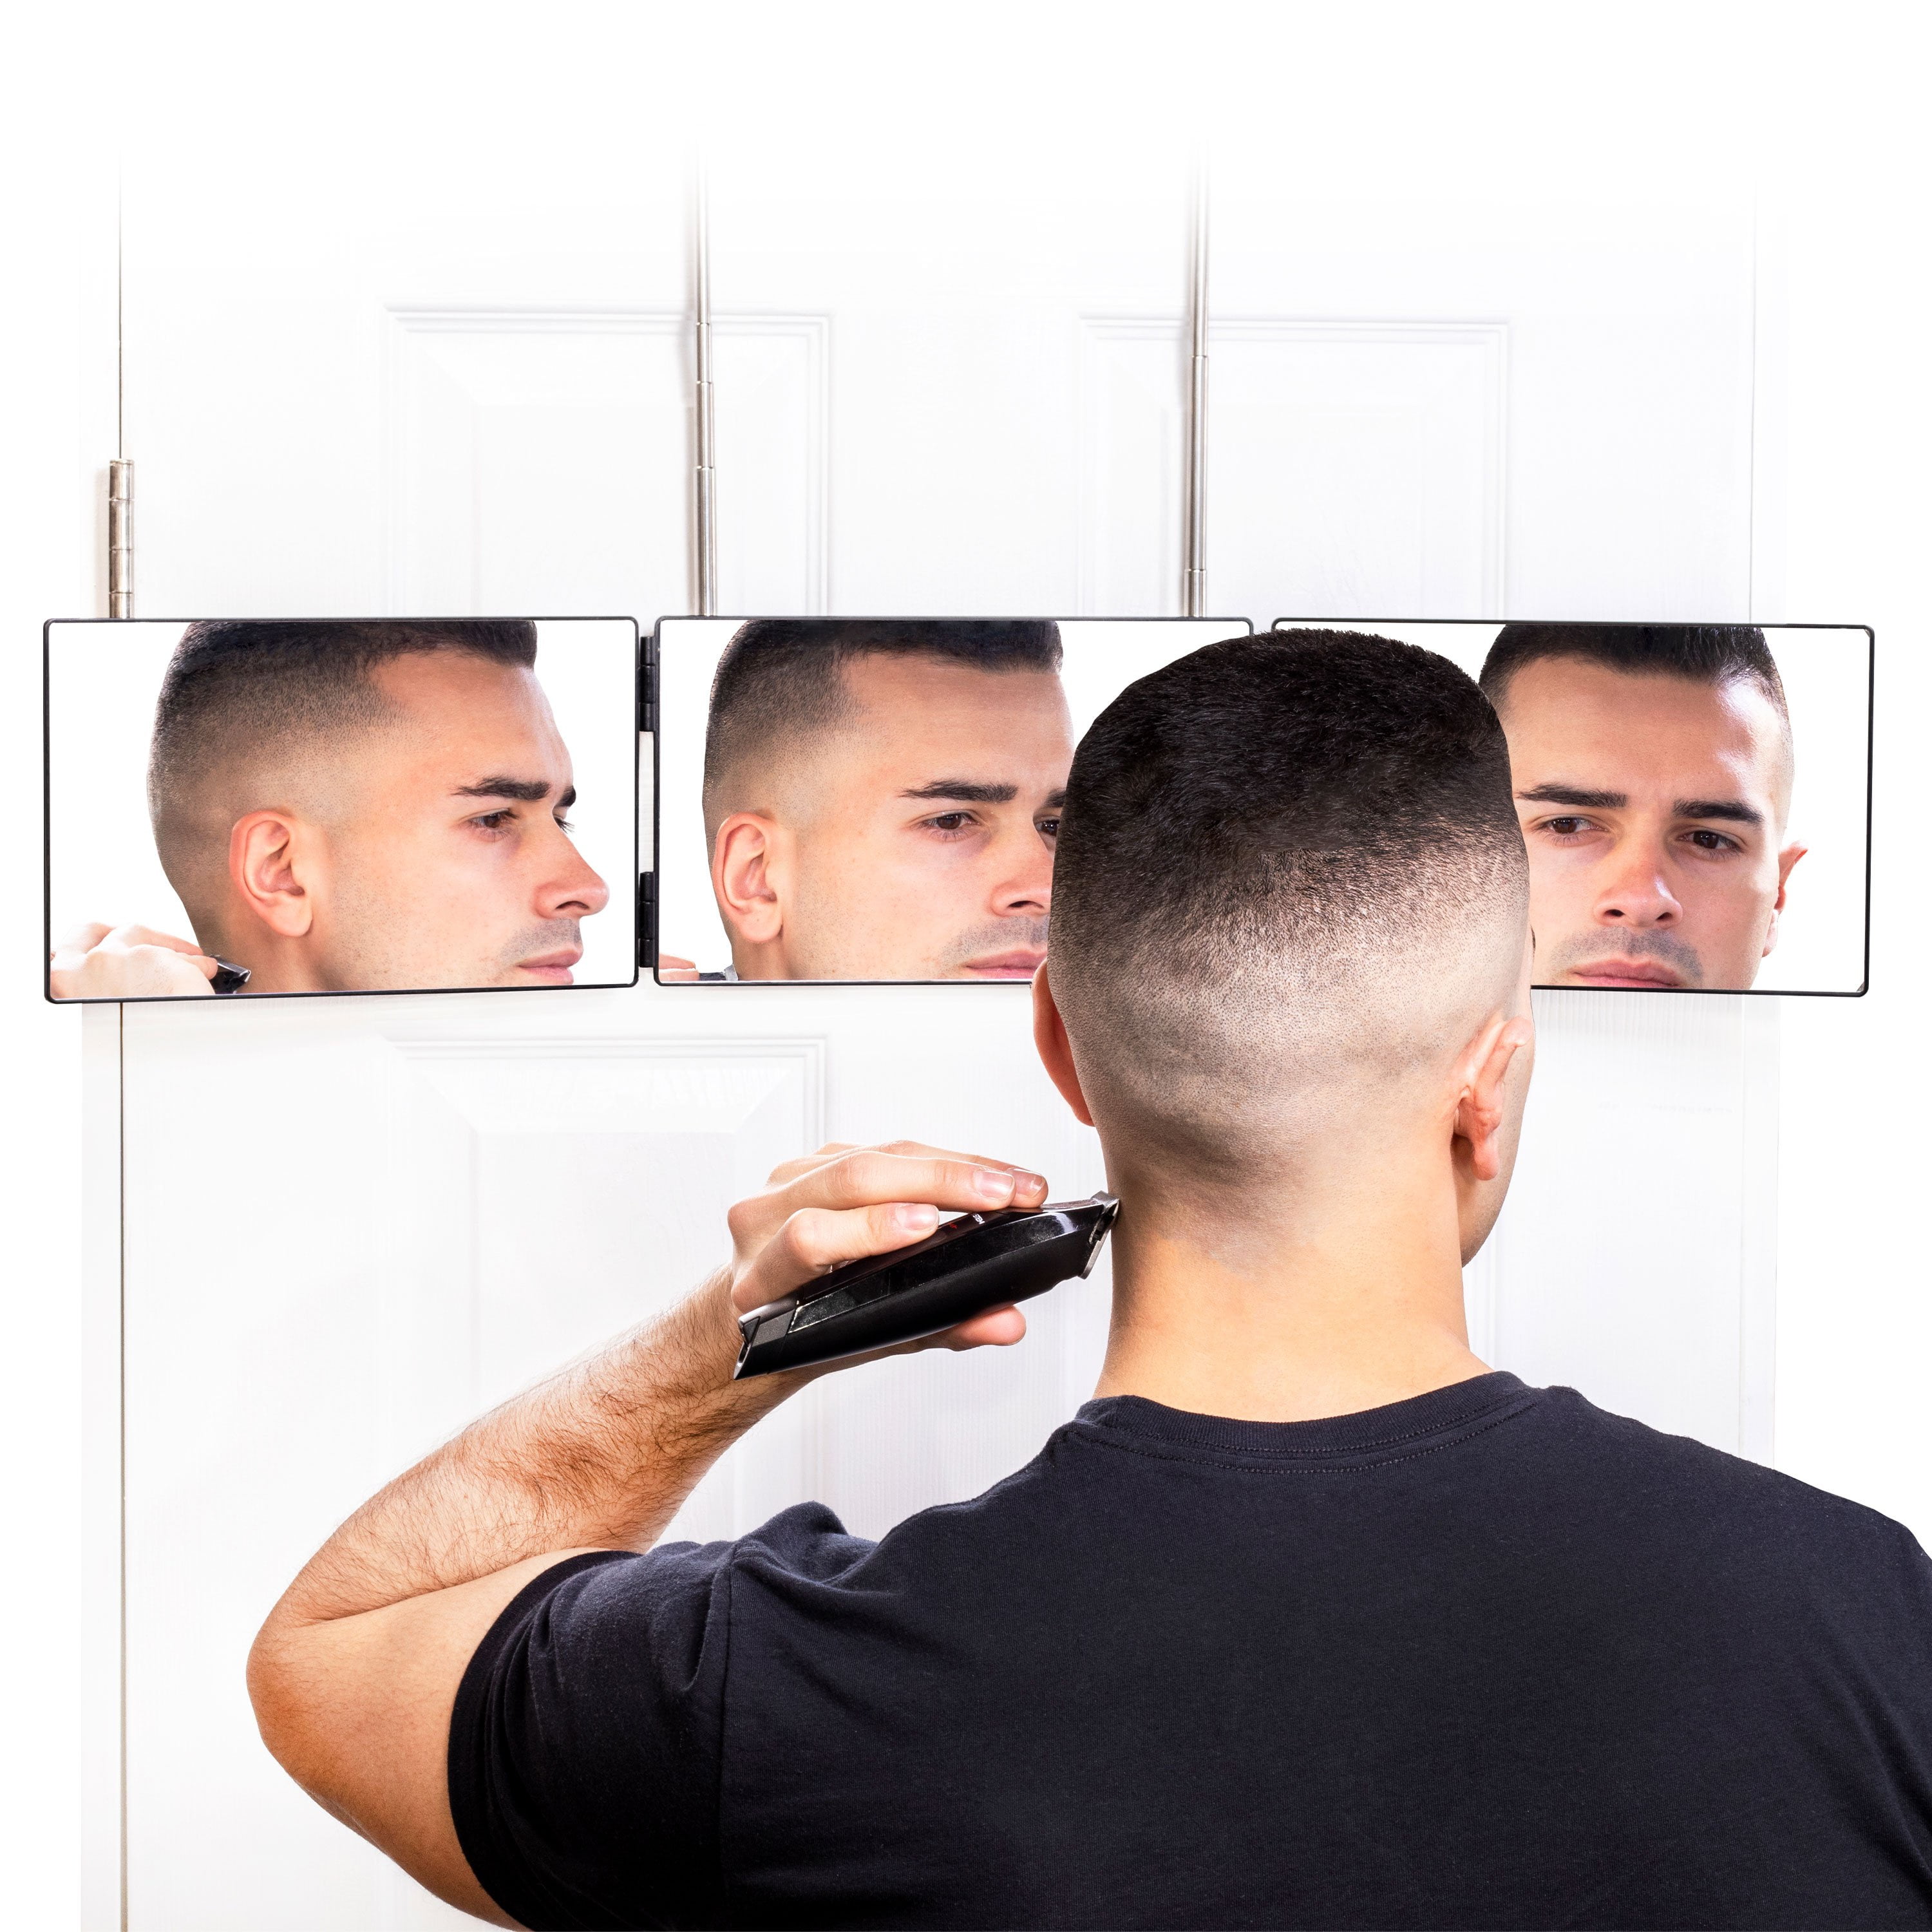 3 Way Mirror for Hair Cutting 360 Mirror Self Haircut Mirror Home Styling  Barber Mirror Haircut Mirror with Trifold Self Cut Mirror Easy to Install  Self Haircut System for Men and Women